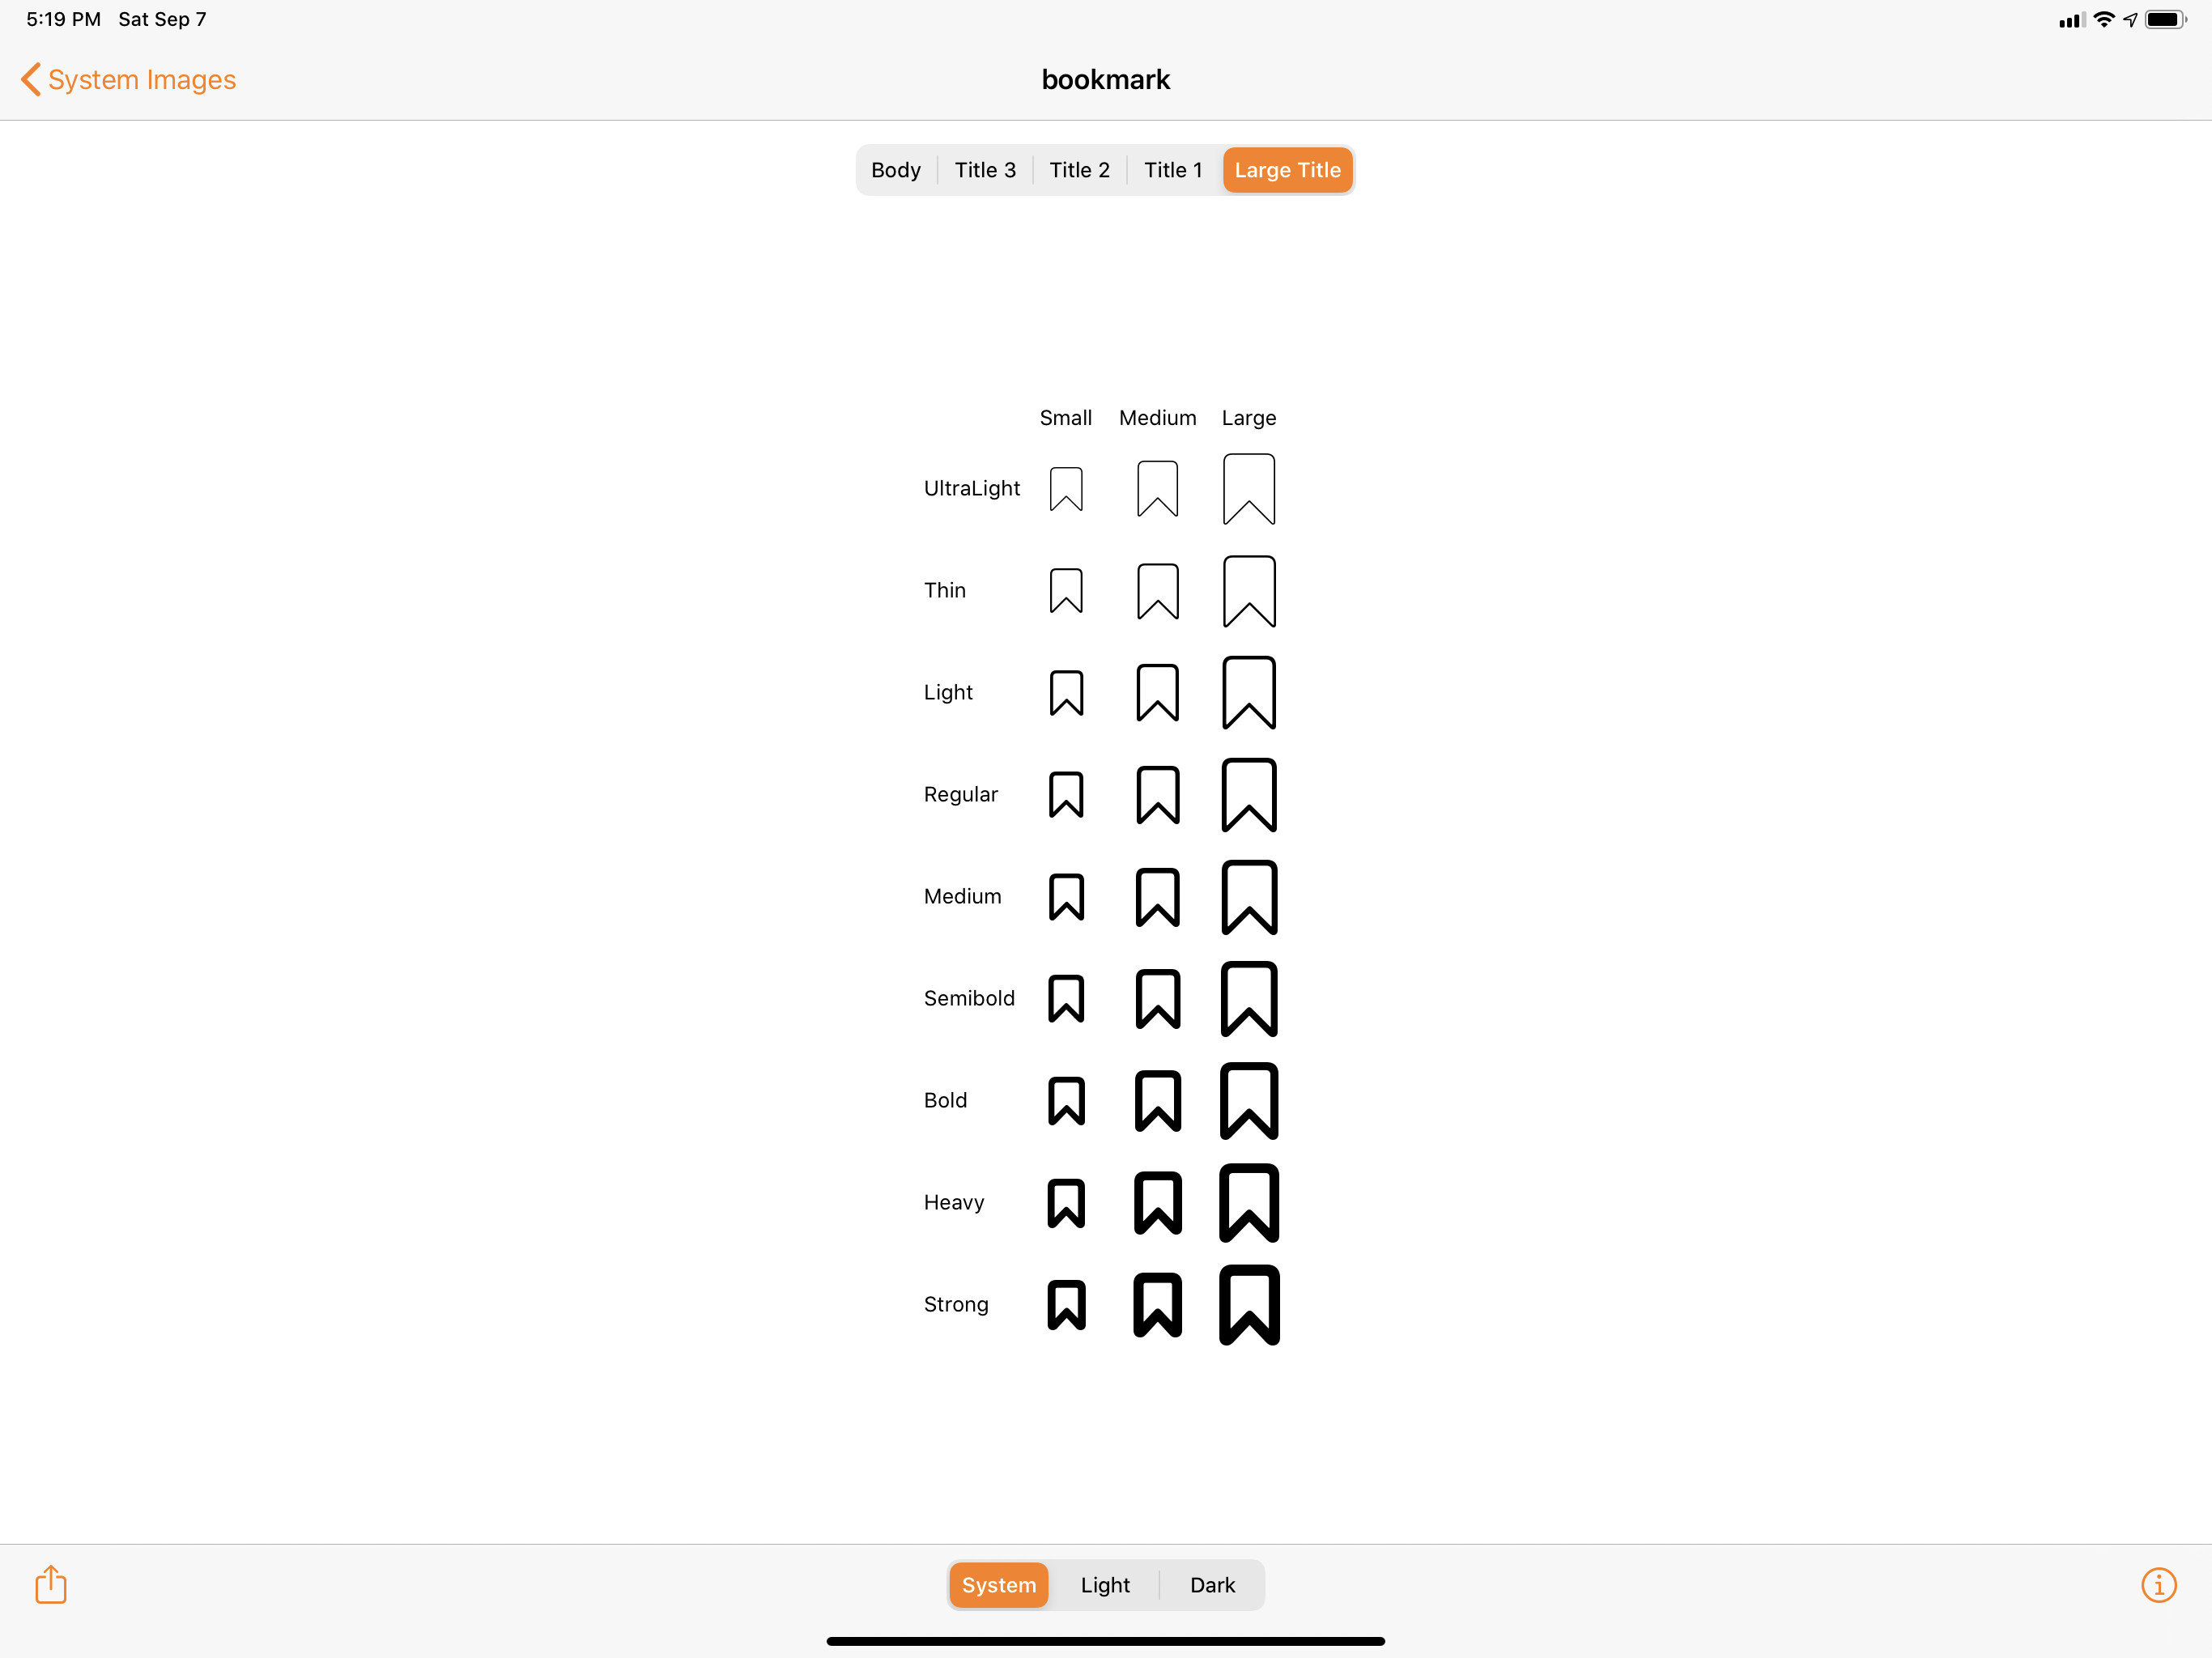 Multiple weights for SF Symbols.